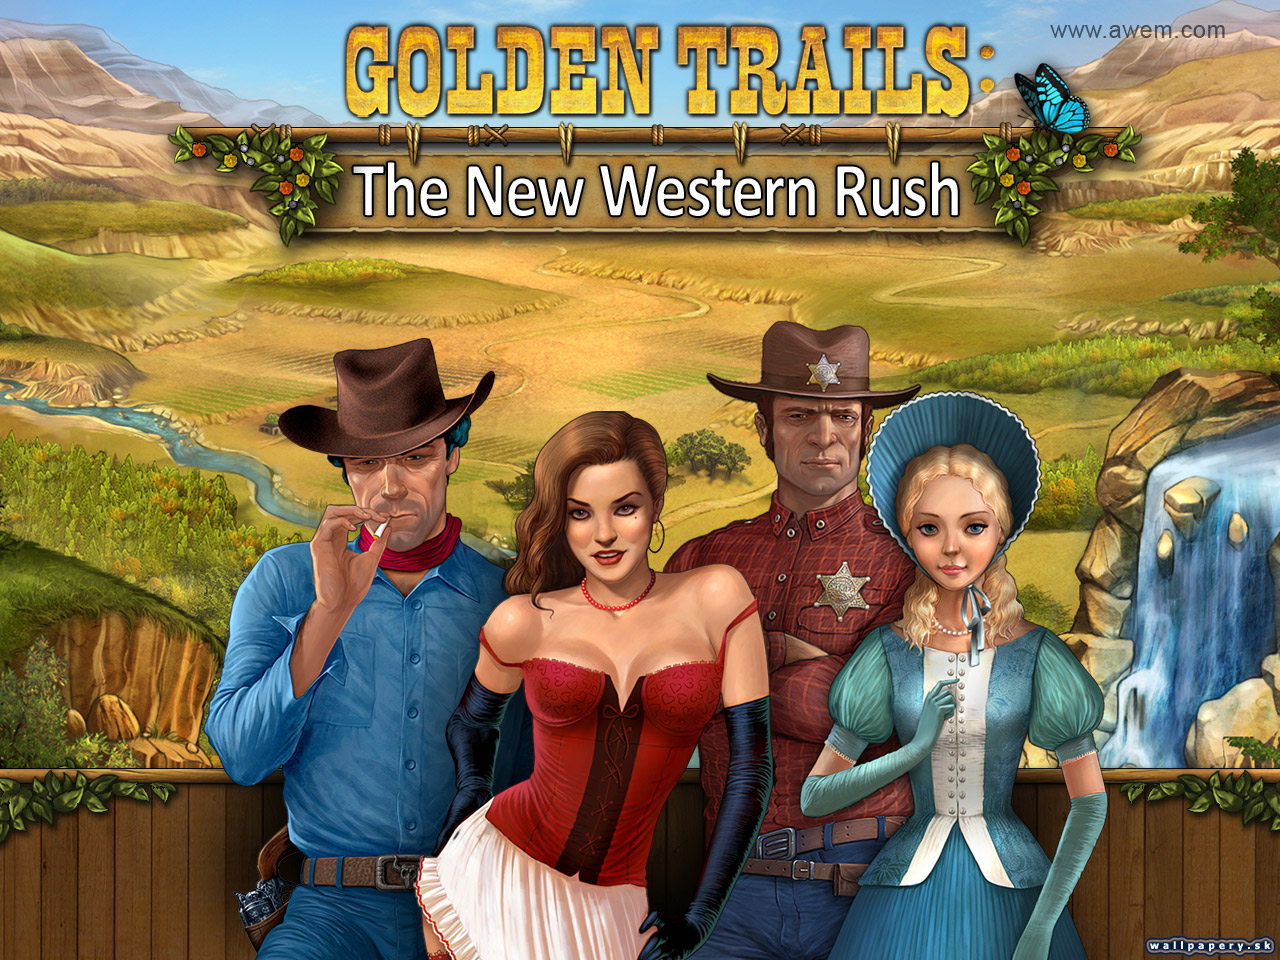 Golden Trails: The New Western Rush - wallpaper 1